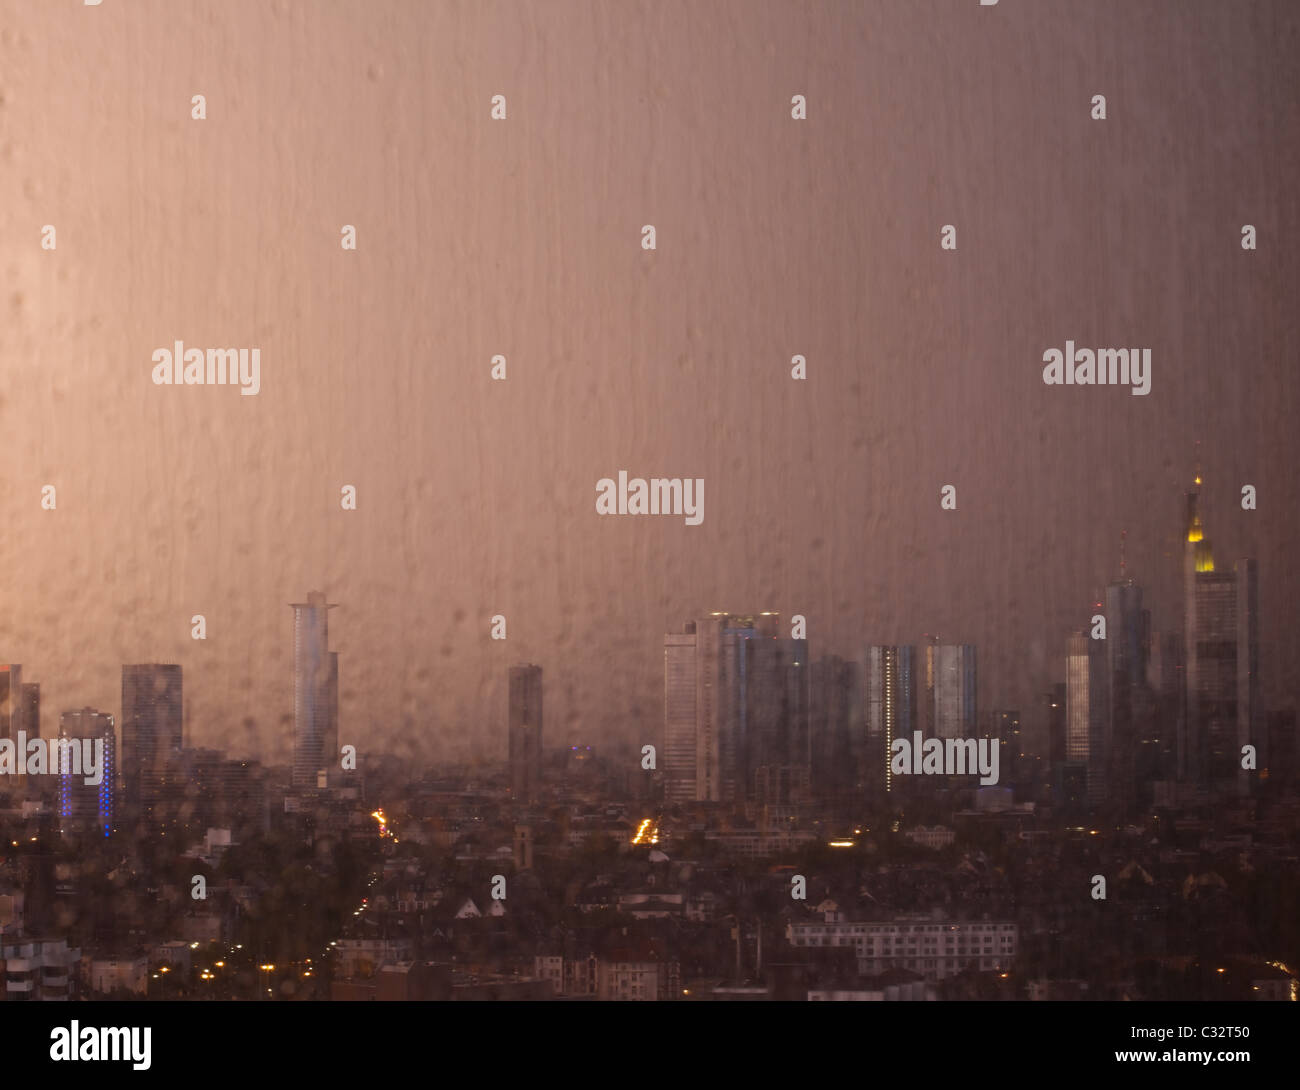 A view of Frankfurt (or any city) during heavy rain through a window. Stock Photo